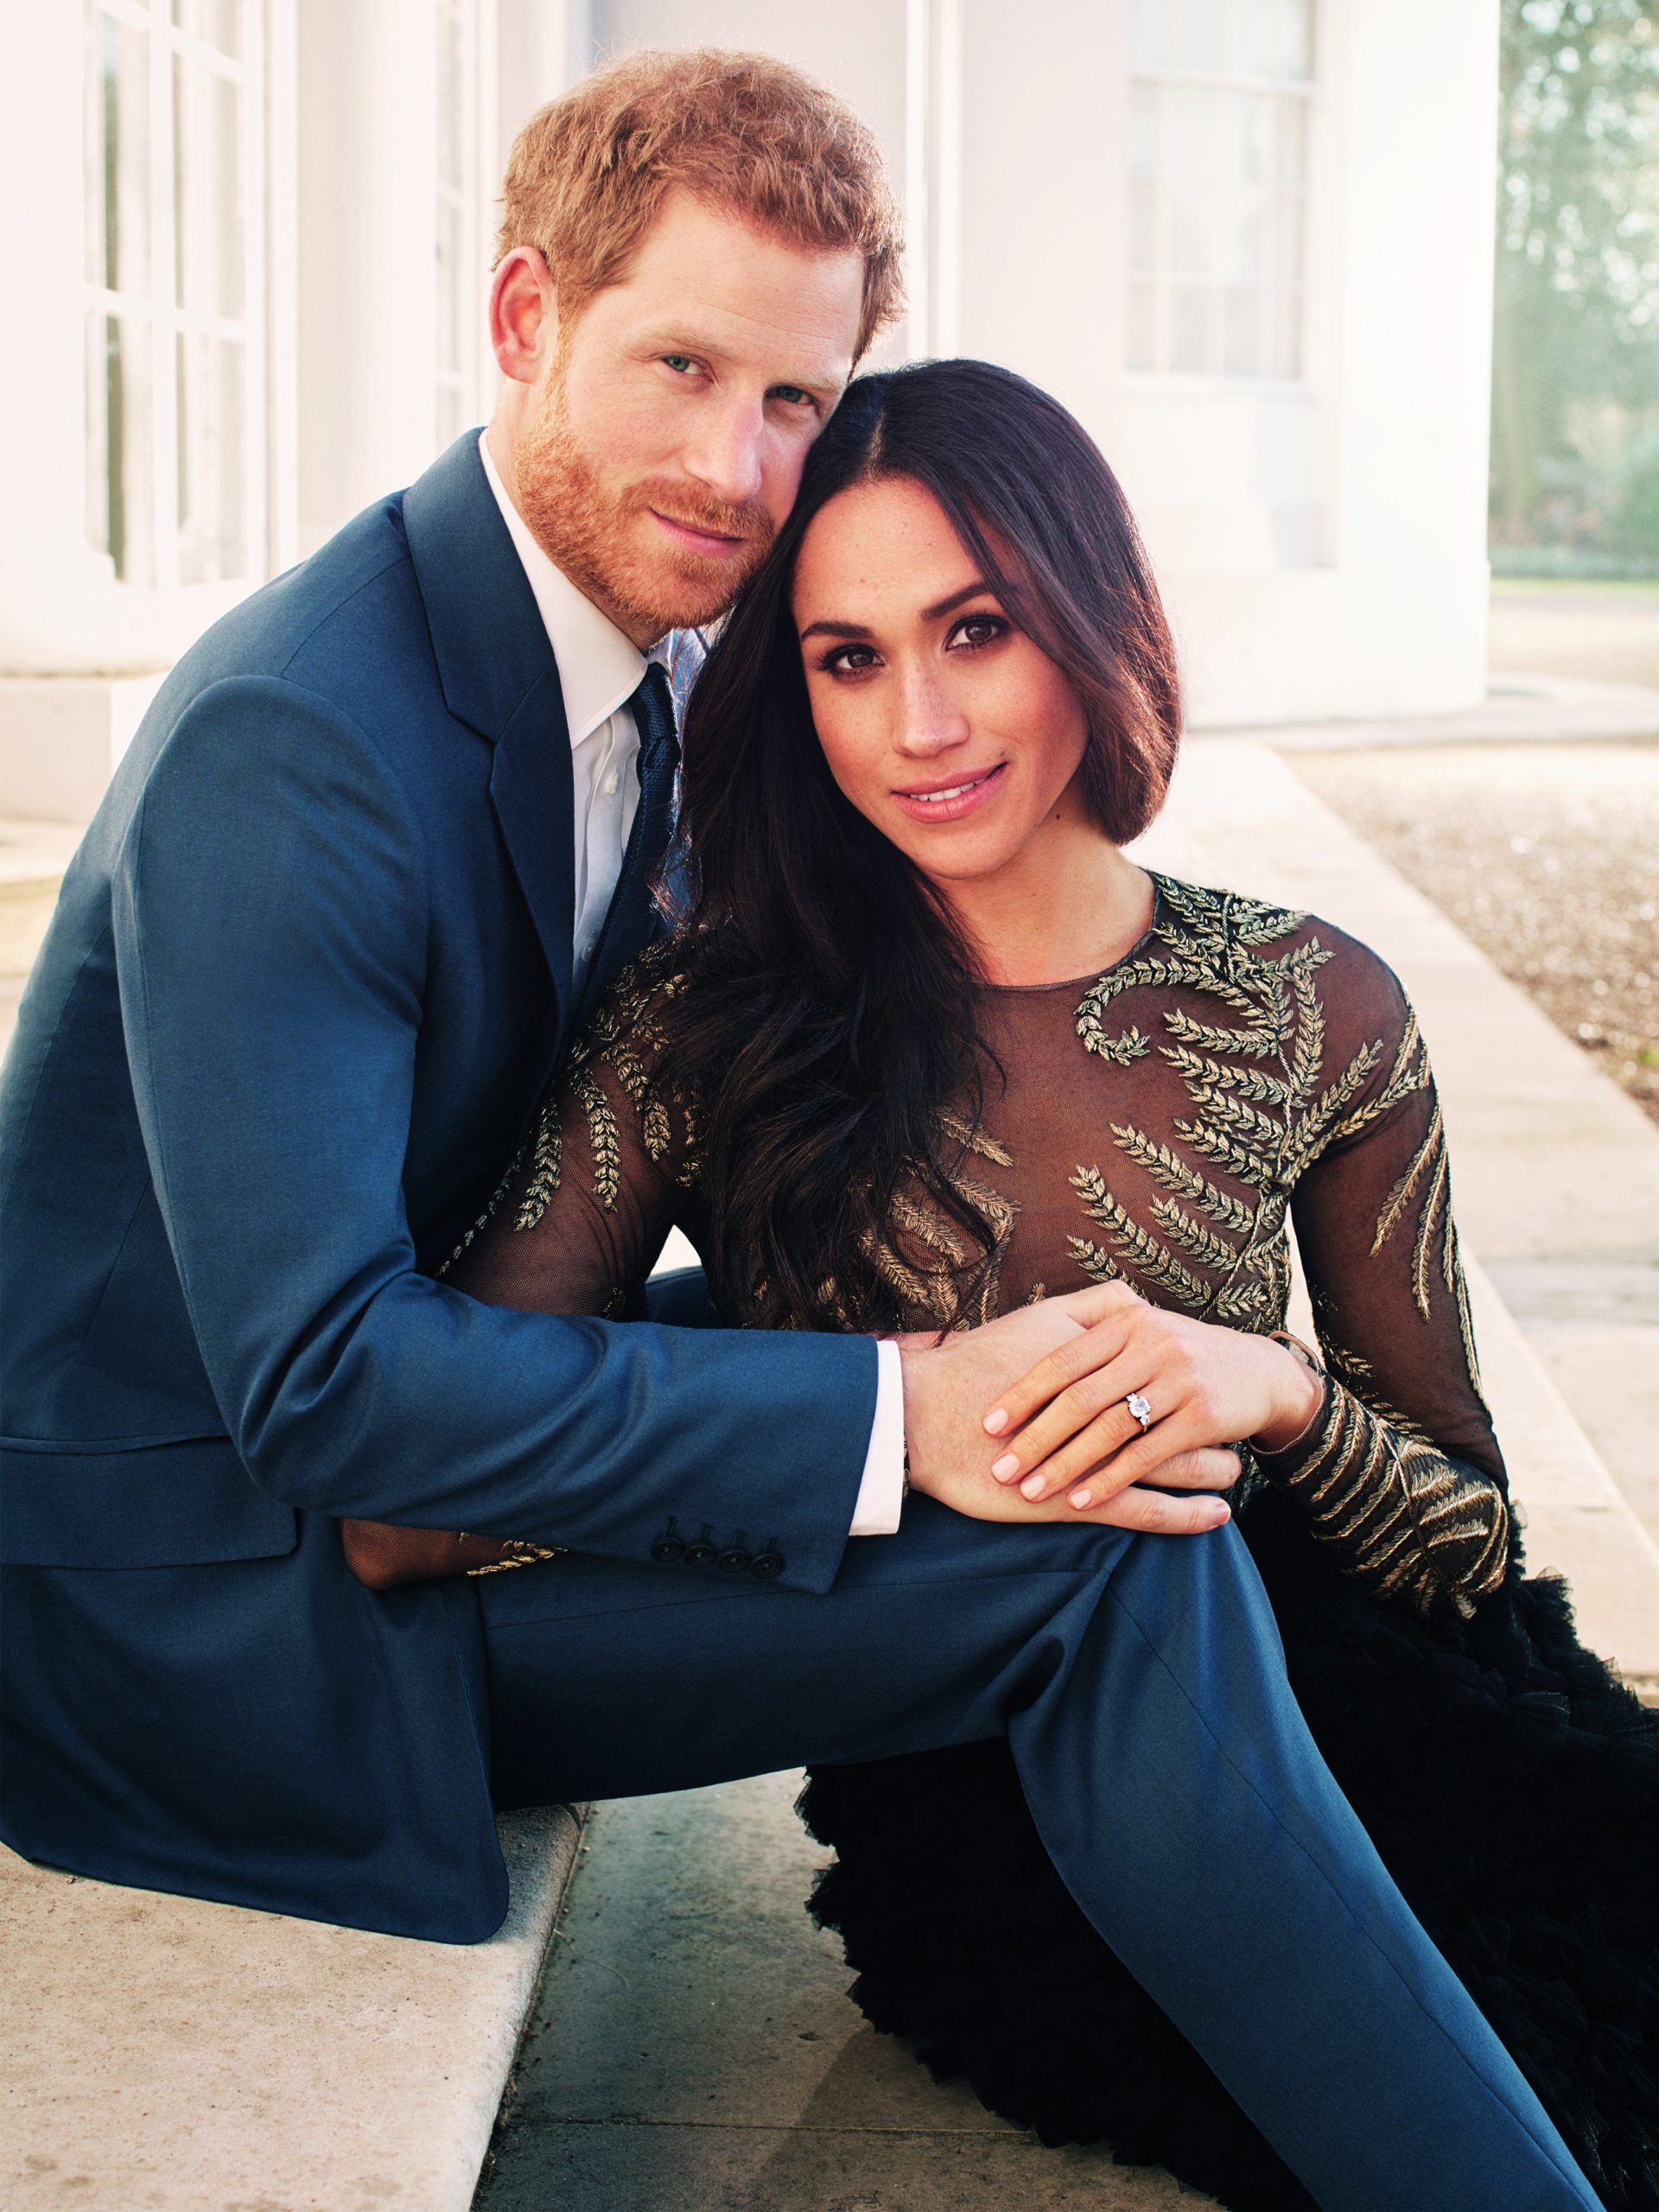 Prince Harry And Meghan Markle Attend Covid Concert Hoping To reunite with William after rift Royal Family Update!